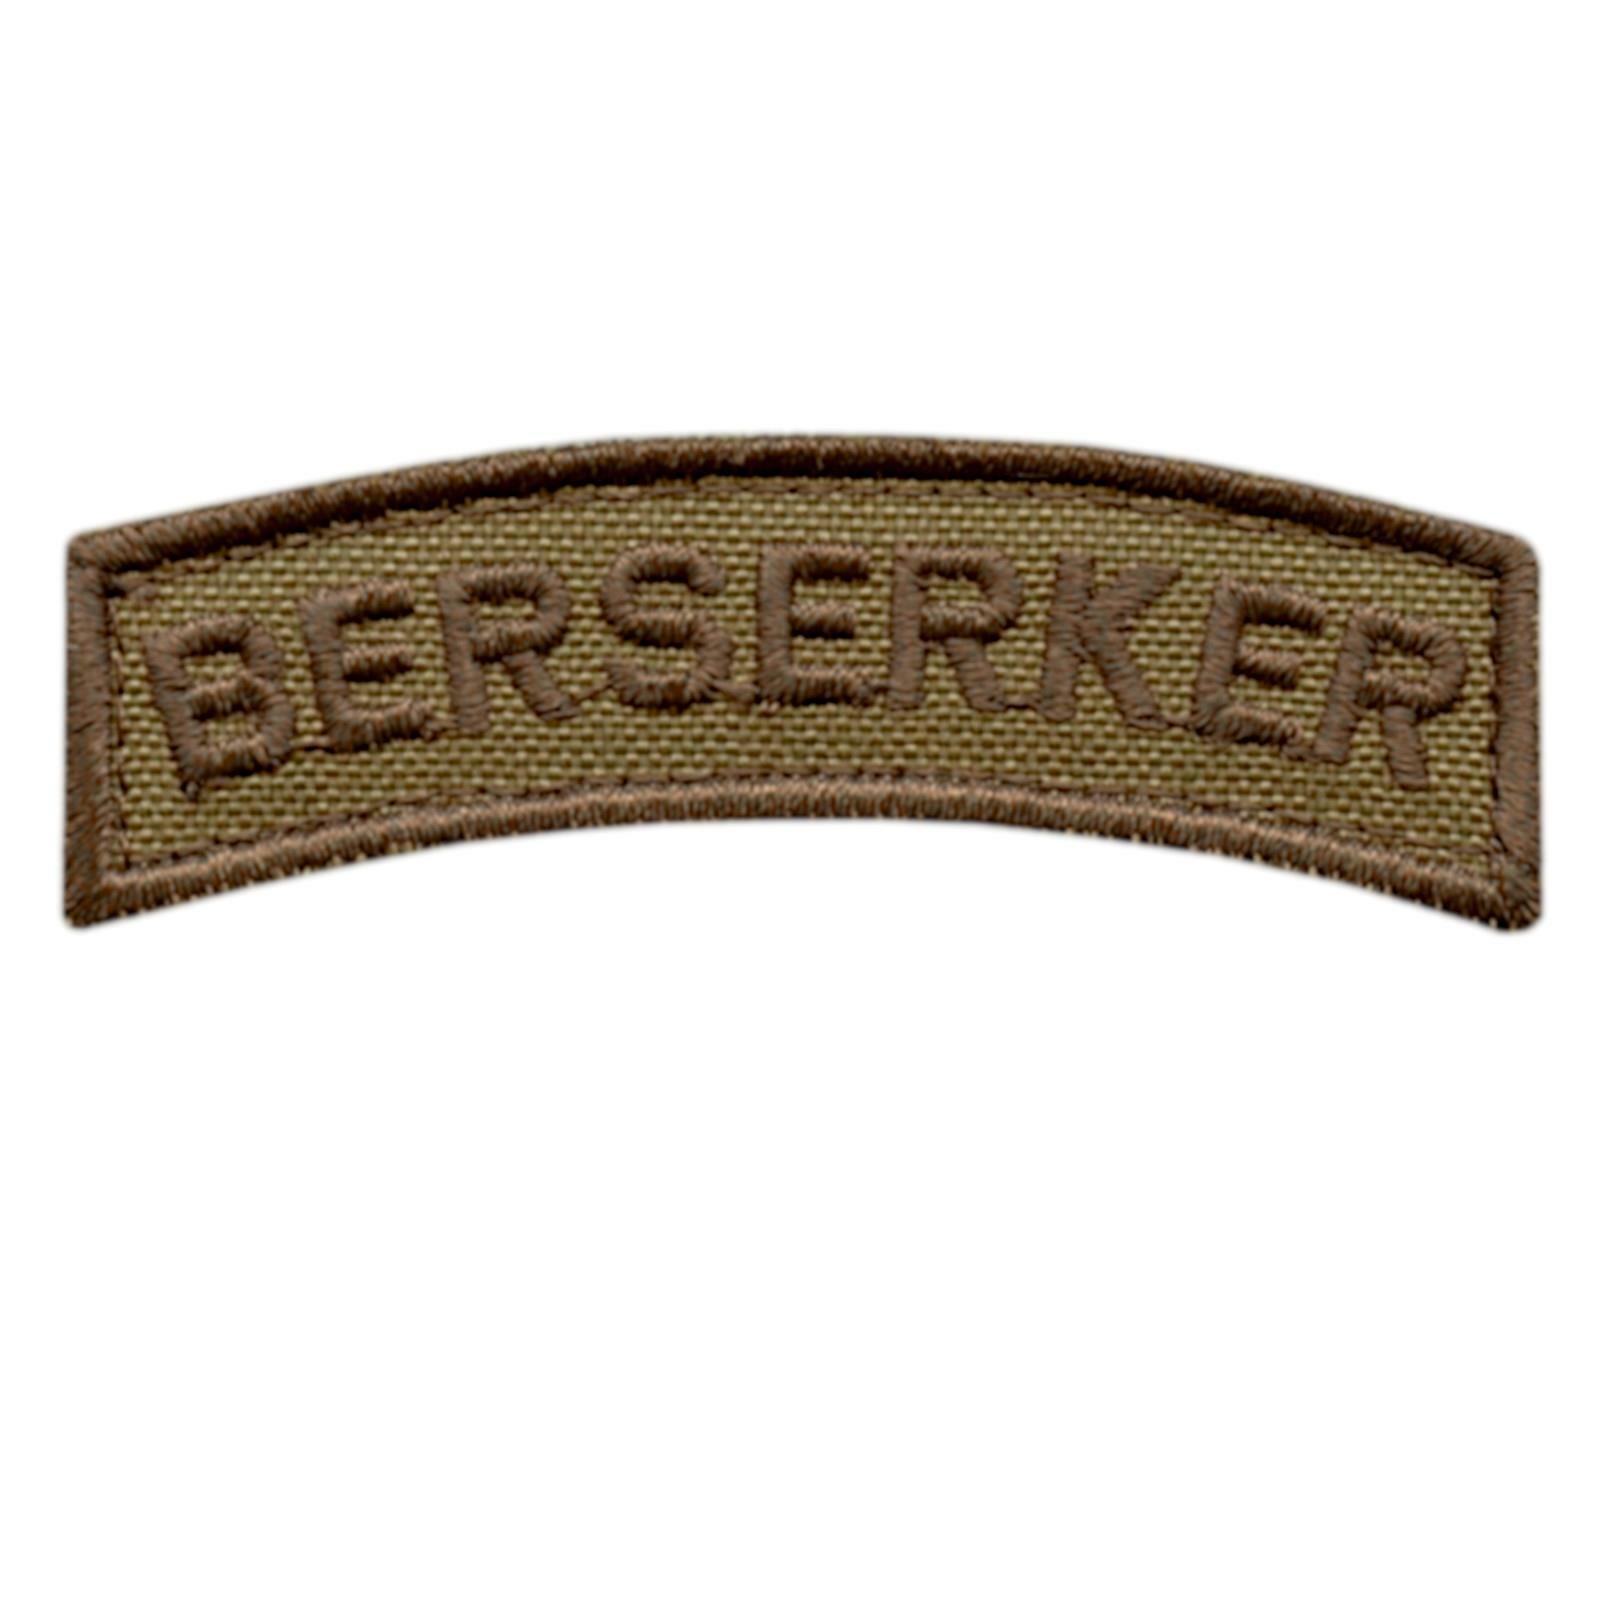 Berserker tab tan coyote embroidered viking norse morale army fastener patch